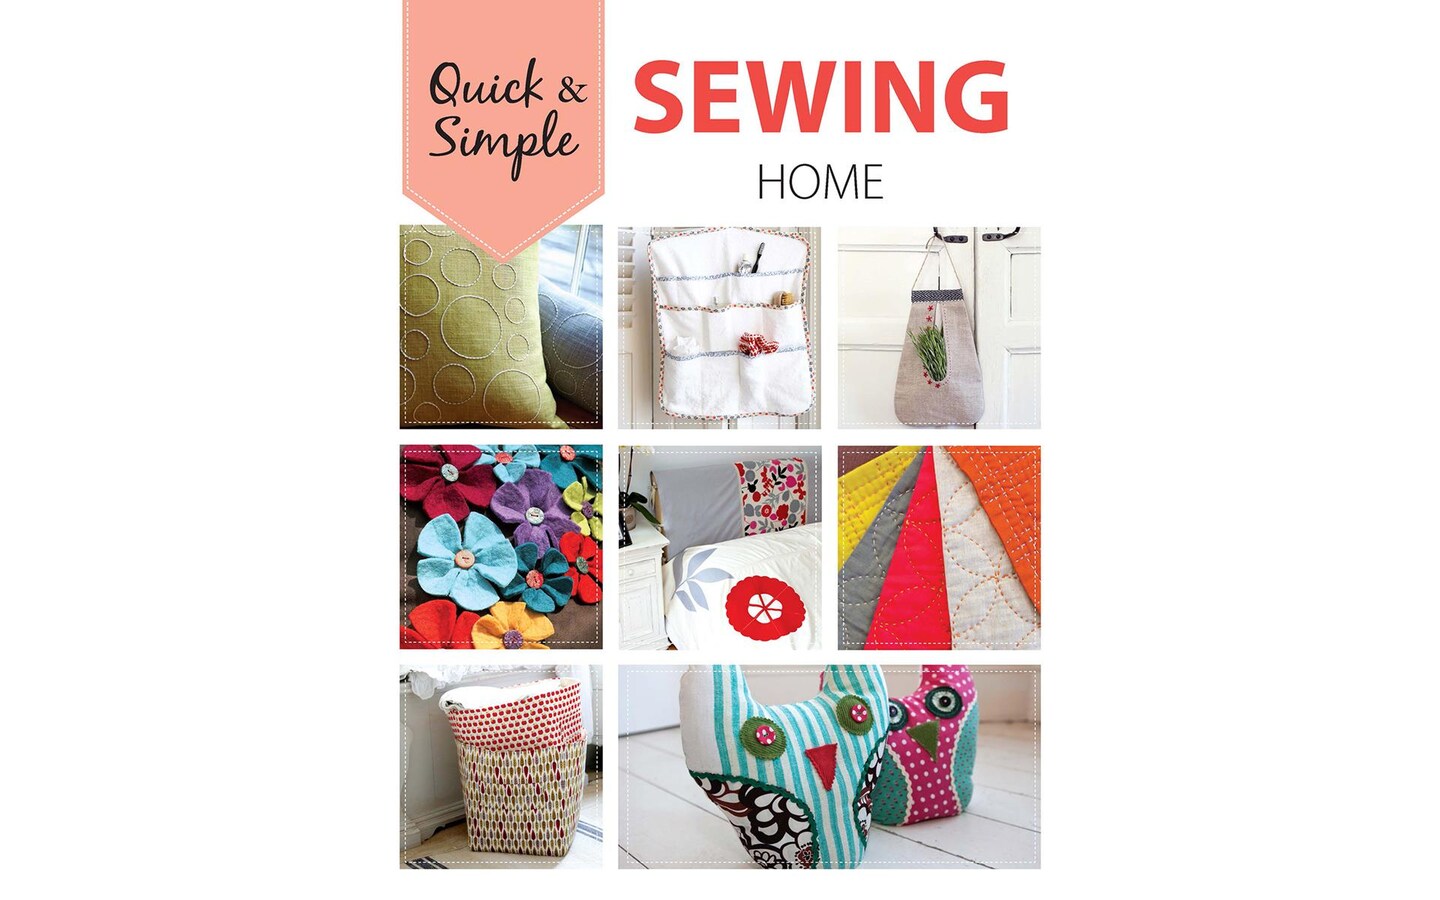 Simply Sewing [Book]